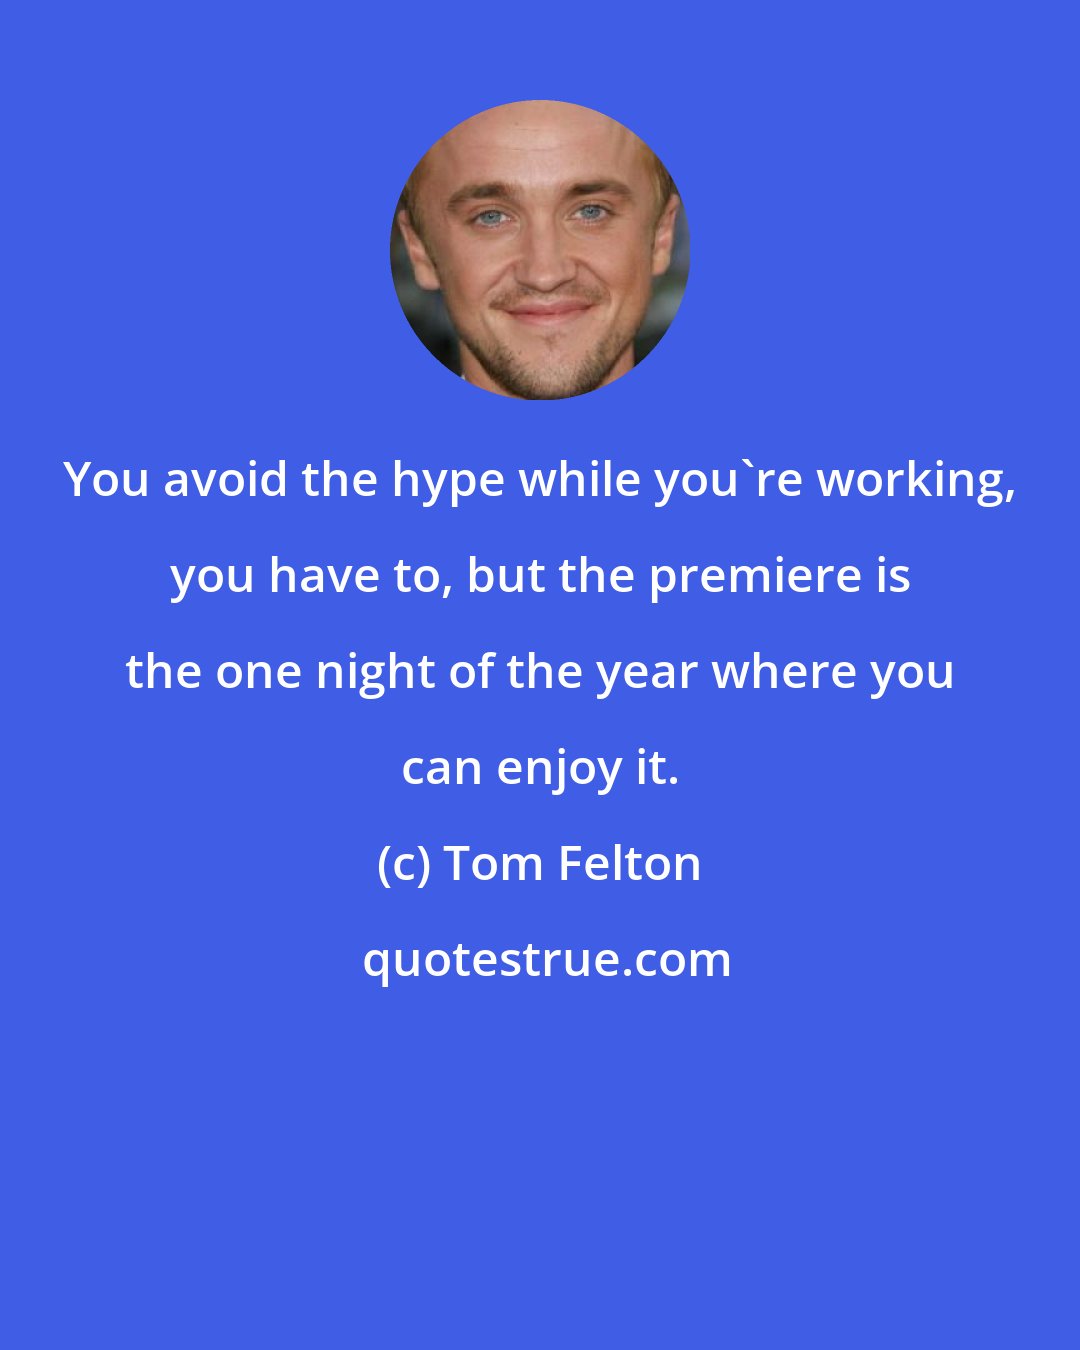 Tom Felton: You avoid the hype while you're working, you have to, but the premiere is the one night of the year where you can enjoy it.